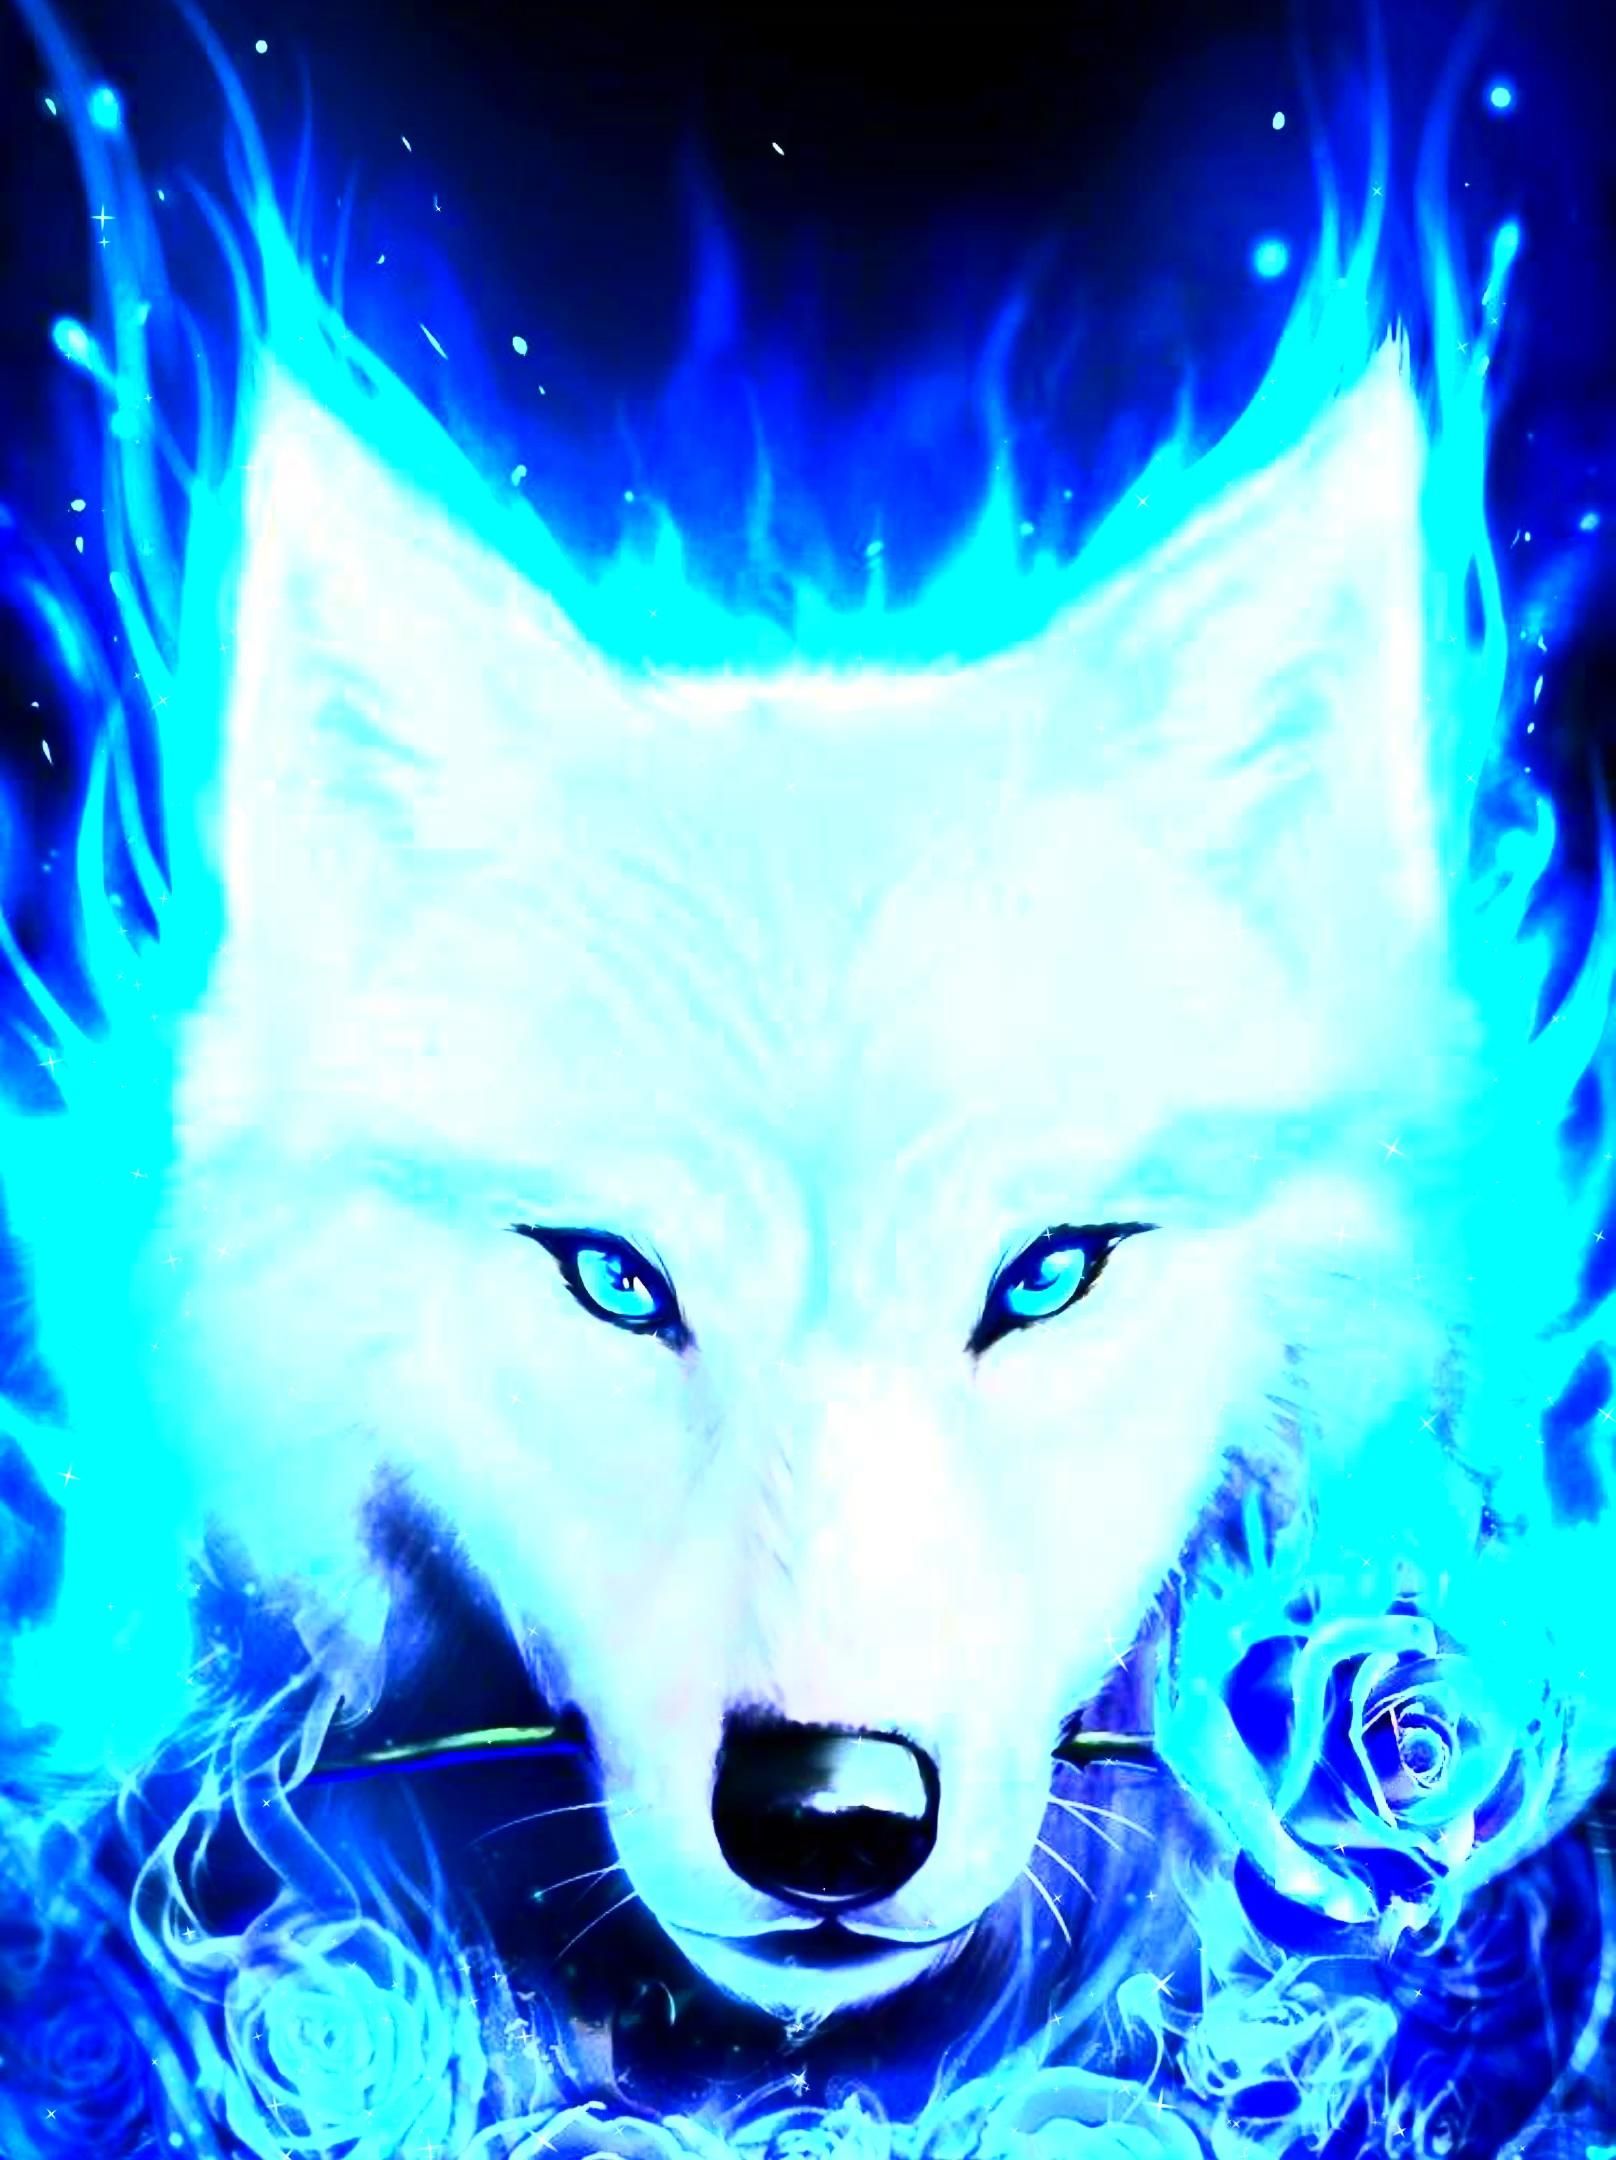 3001839 2000x1300 Animal Wolf  Rare Gallery HD Wallpapers